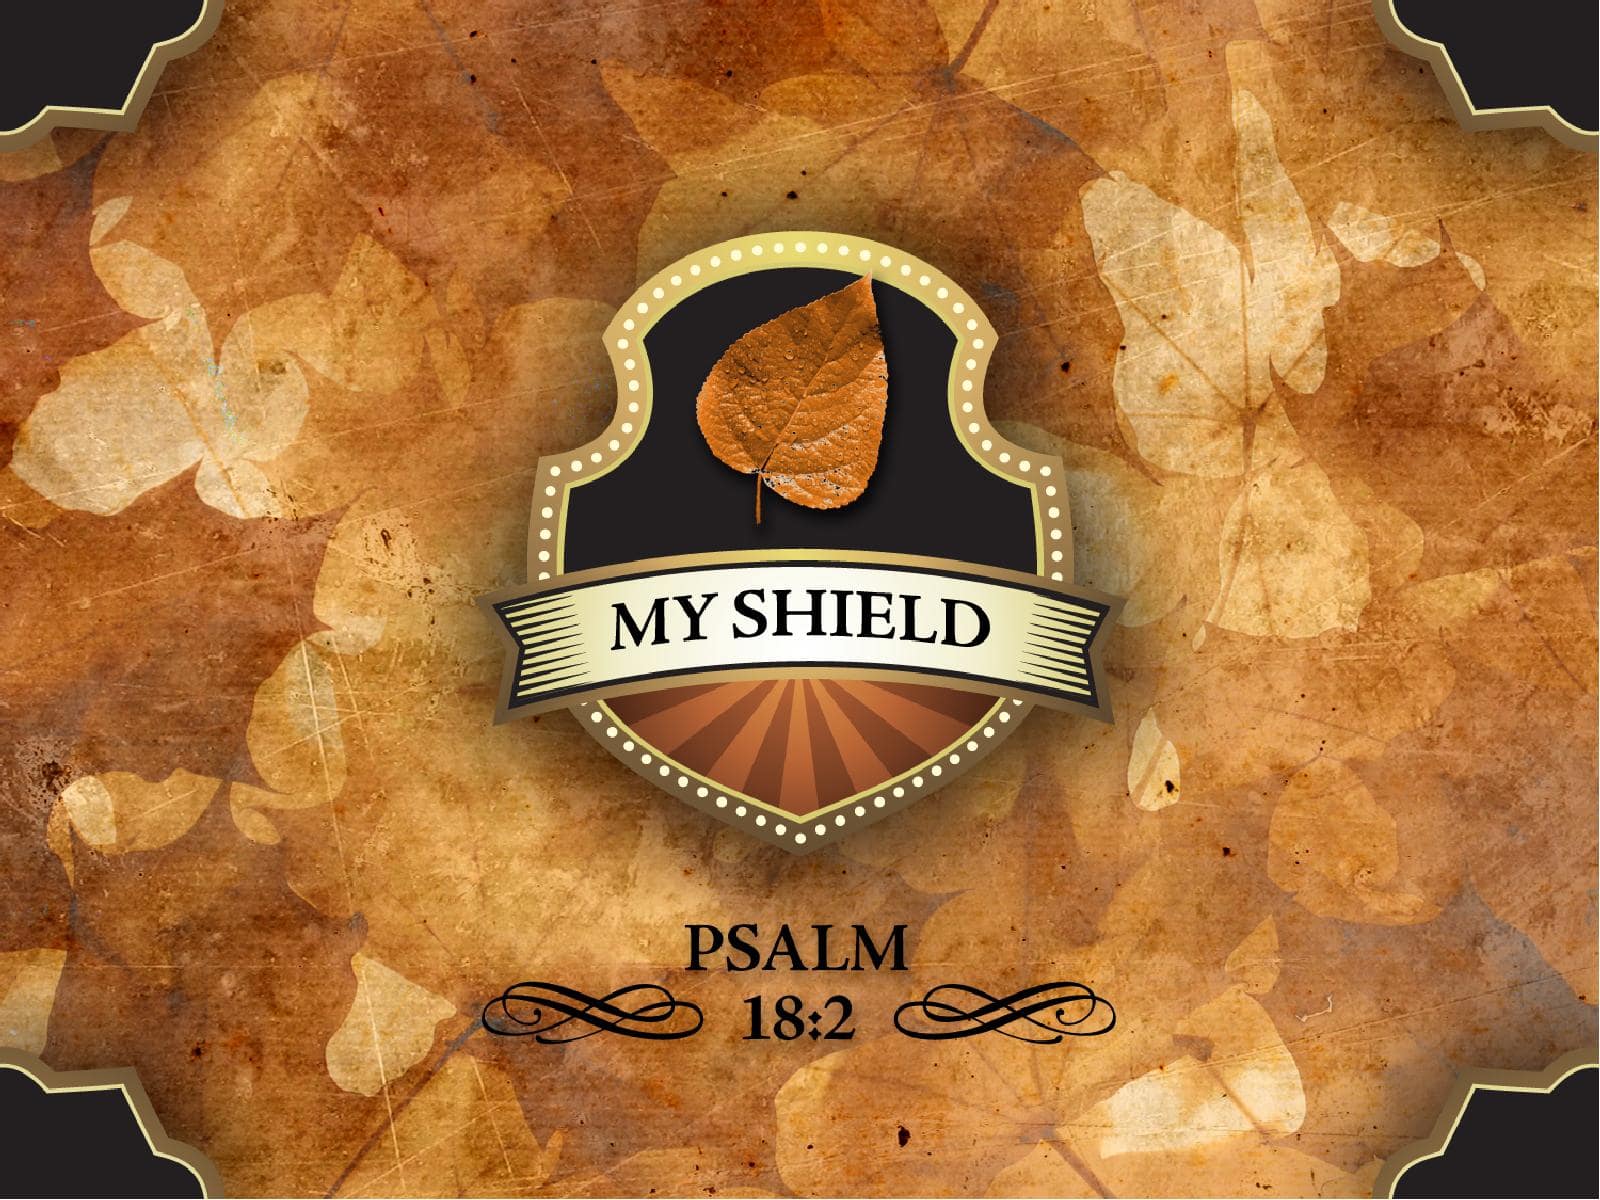 ShareFaith Media » Psalm 91 A Mighty Fortress is our God Bible